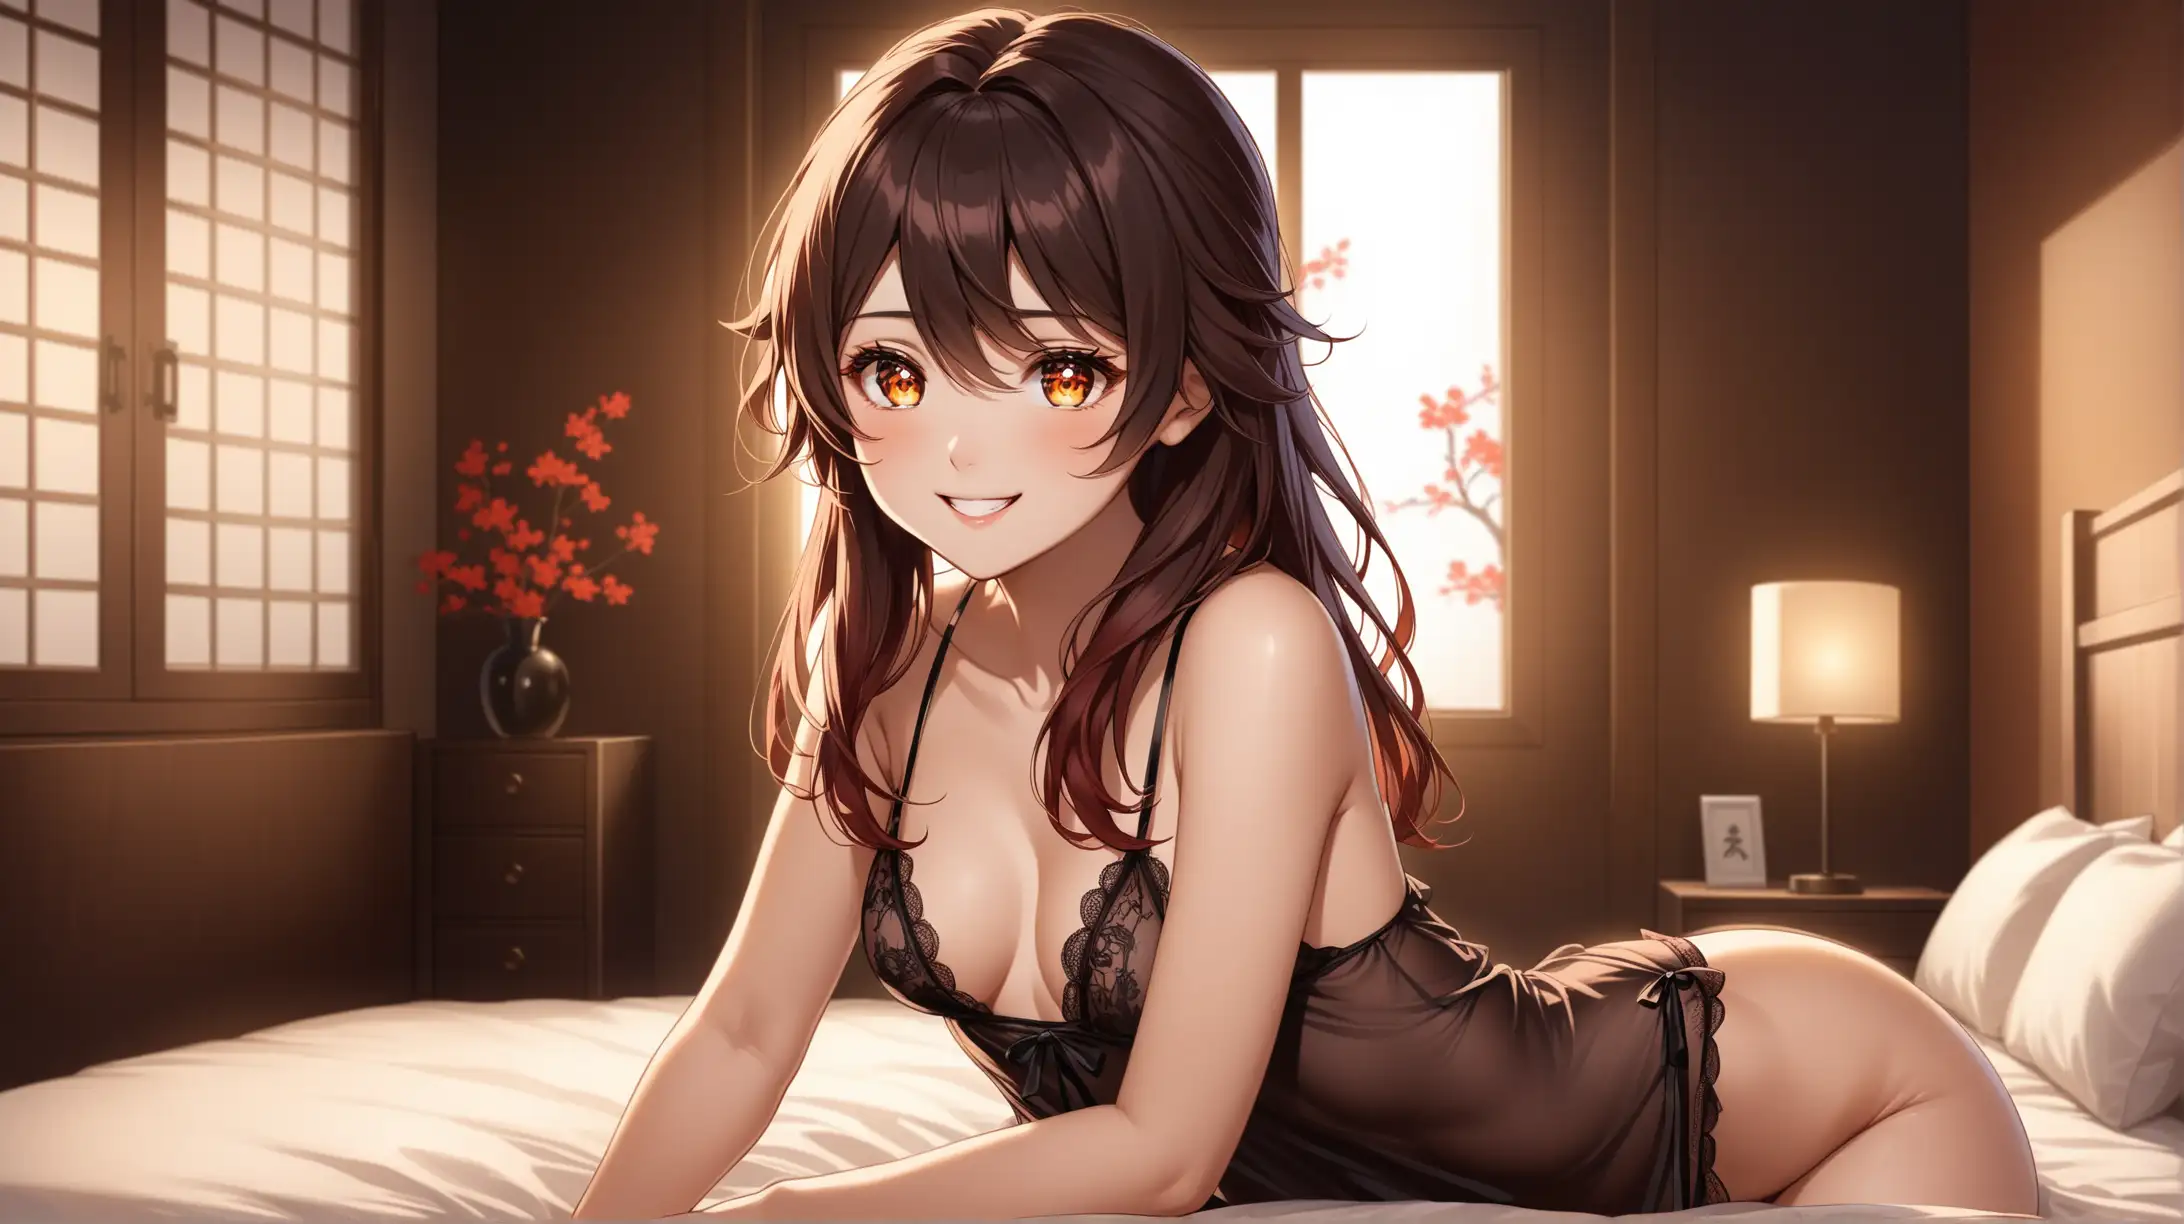 Draw the character Hu Tao, high quality, dim lighting, long shot, indoors, bedroom, seductive pose, babydoll dress, revealing, erotic, smiling at the viewer